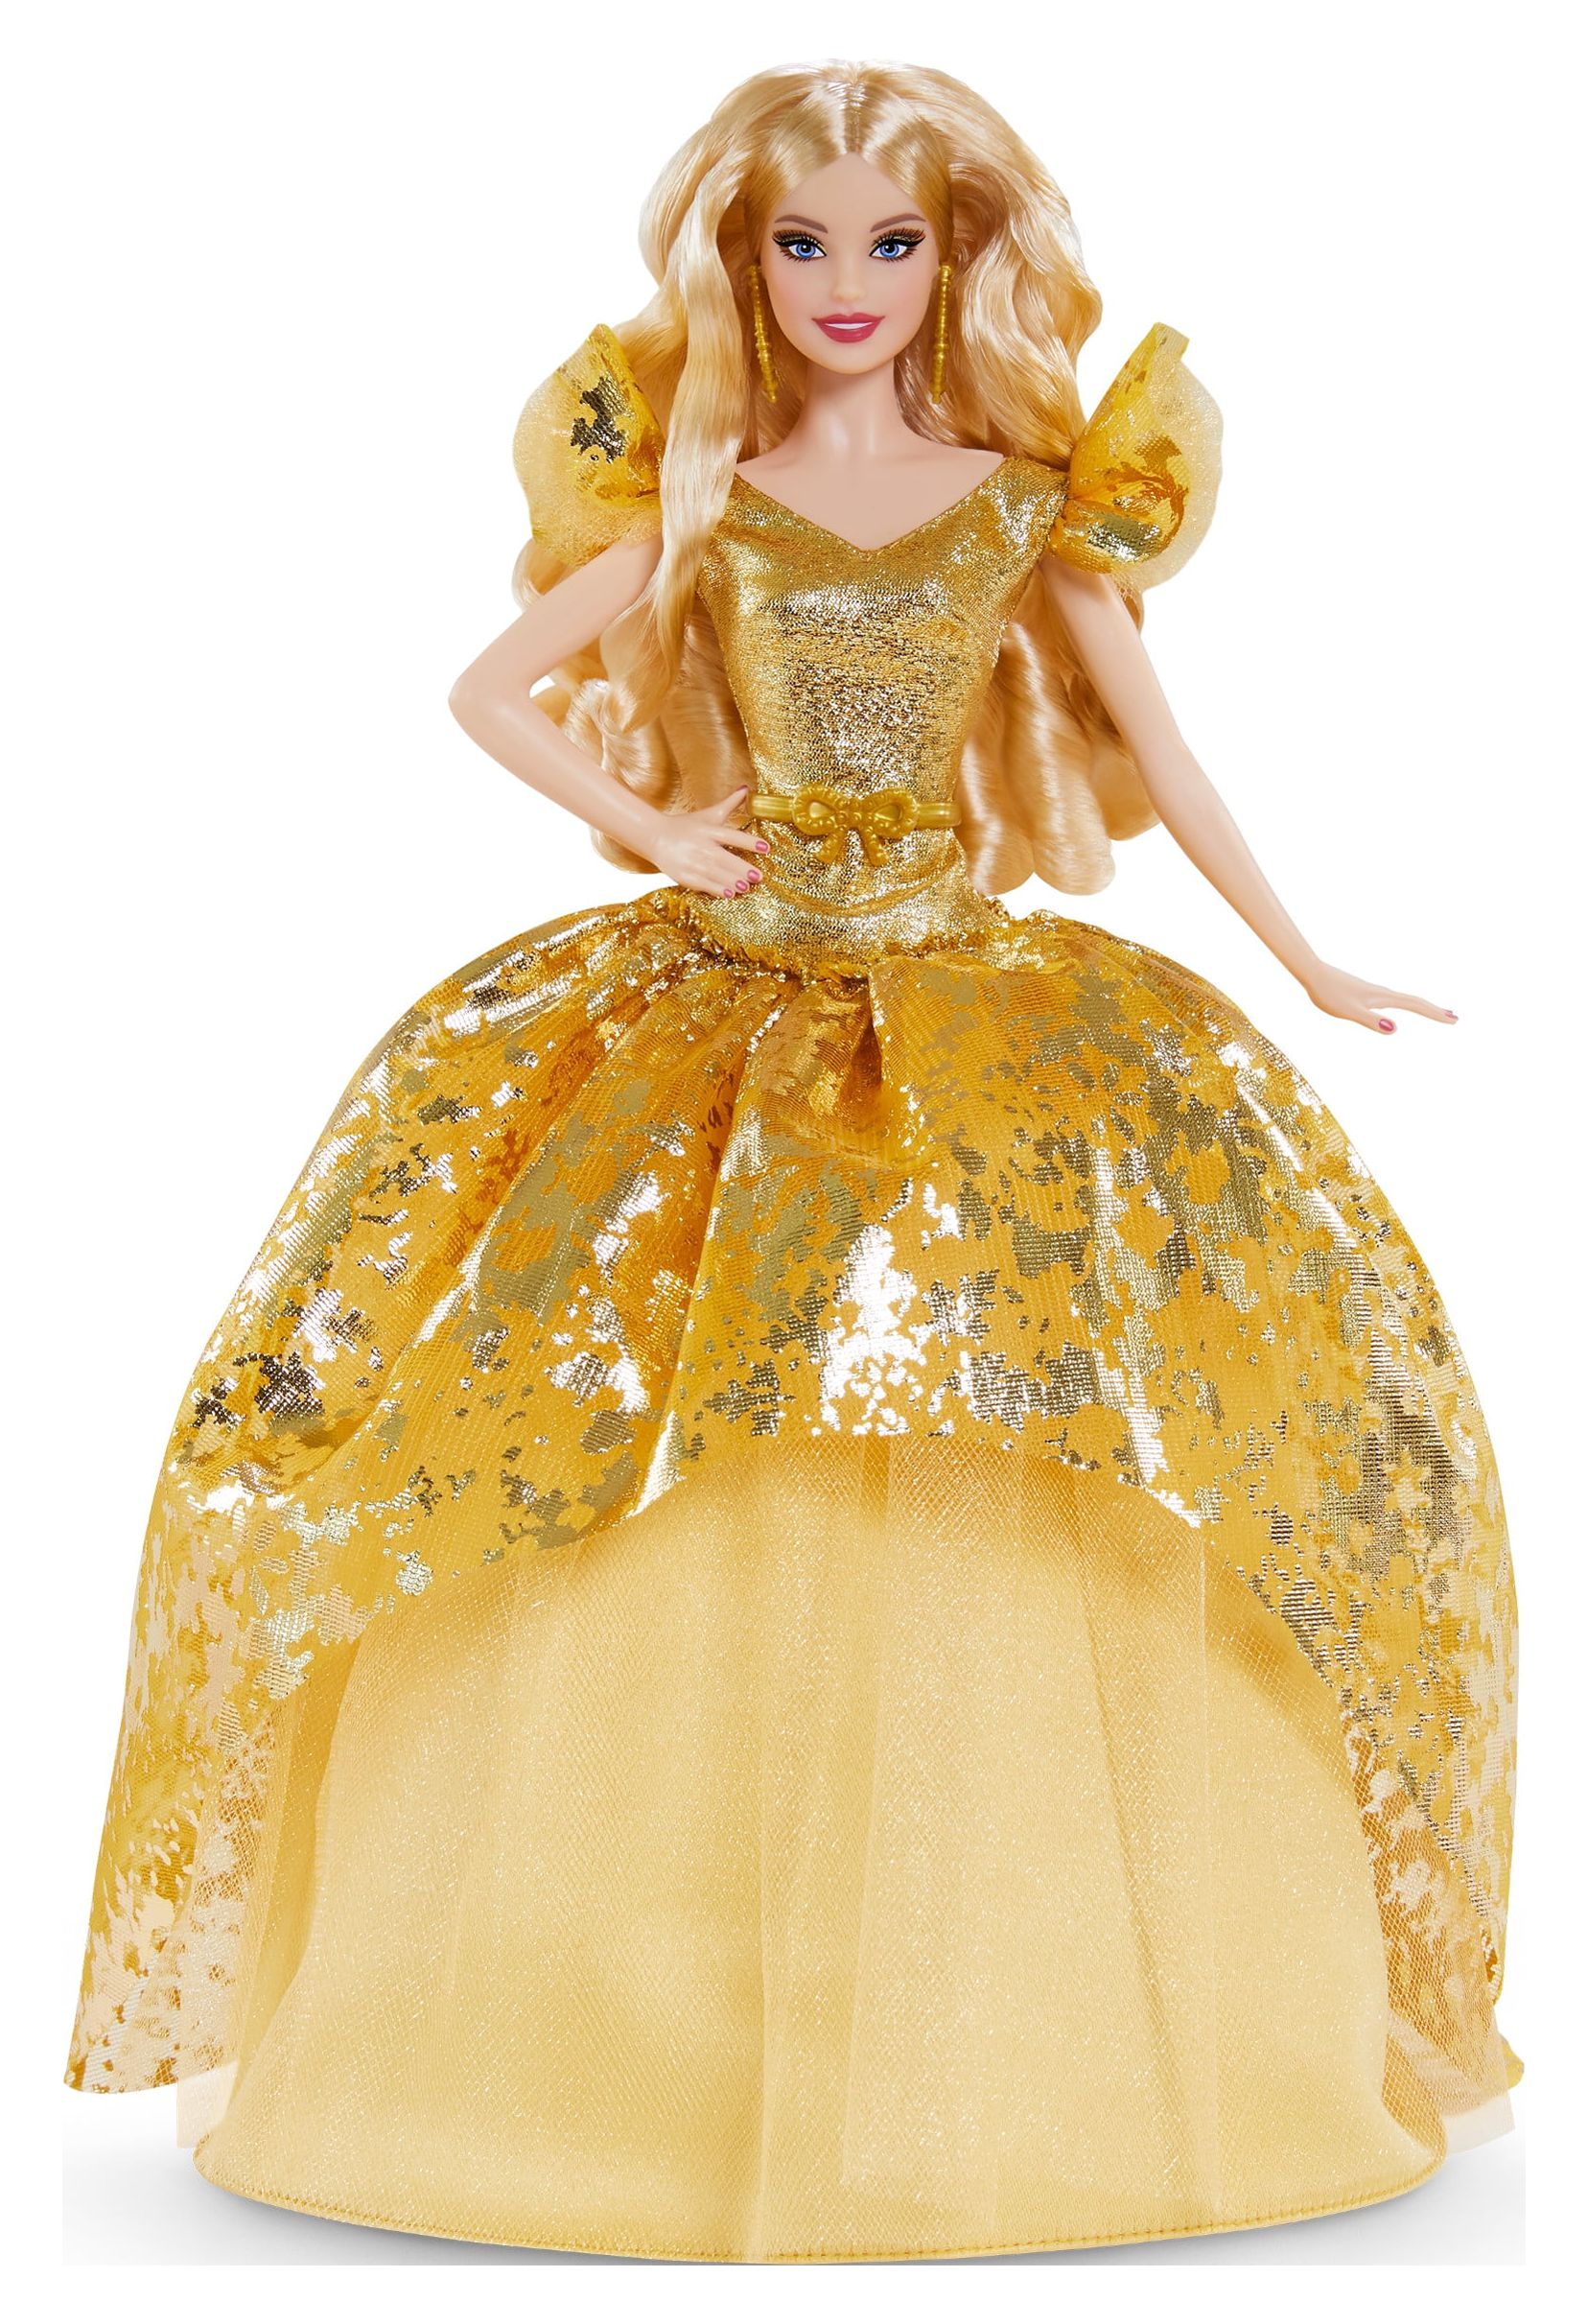 Barbie Signature 2020 Holiday Barbie Doll (12-inch Blonde Long Hair) in Golden Gown - image 1 of 8